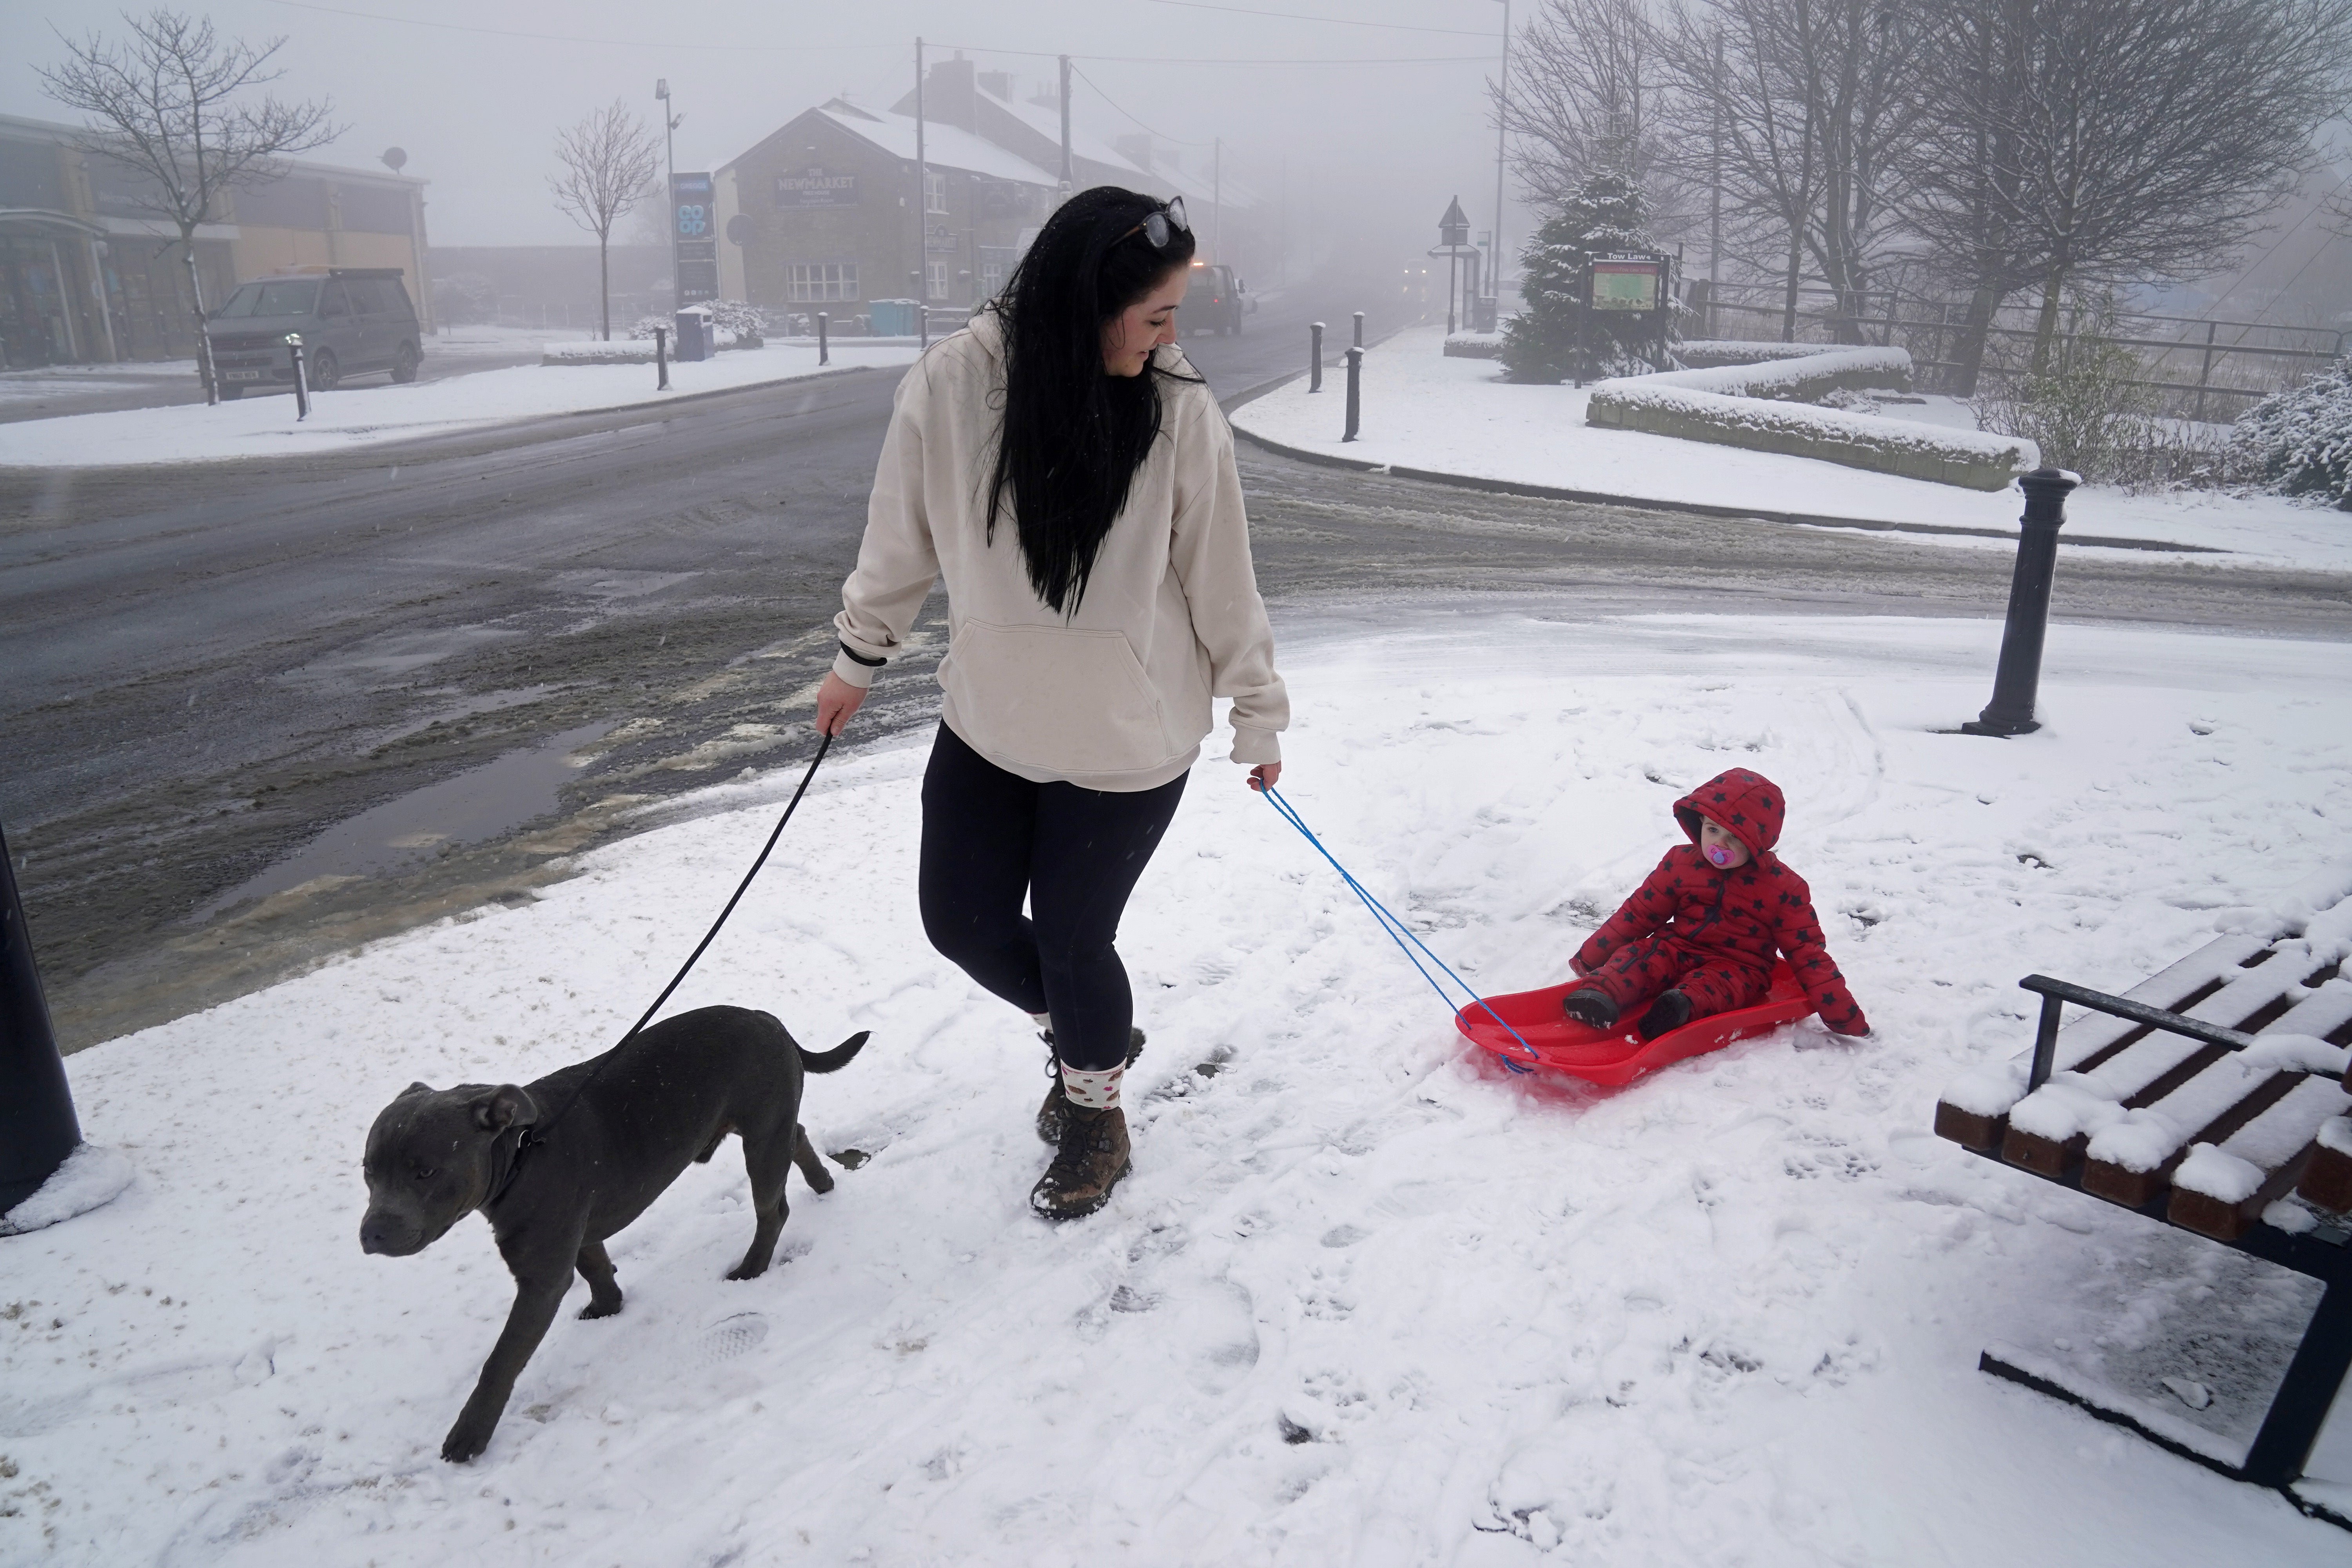 Snow fell in Tow Law, County Durham